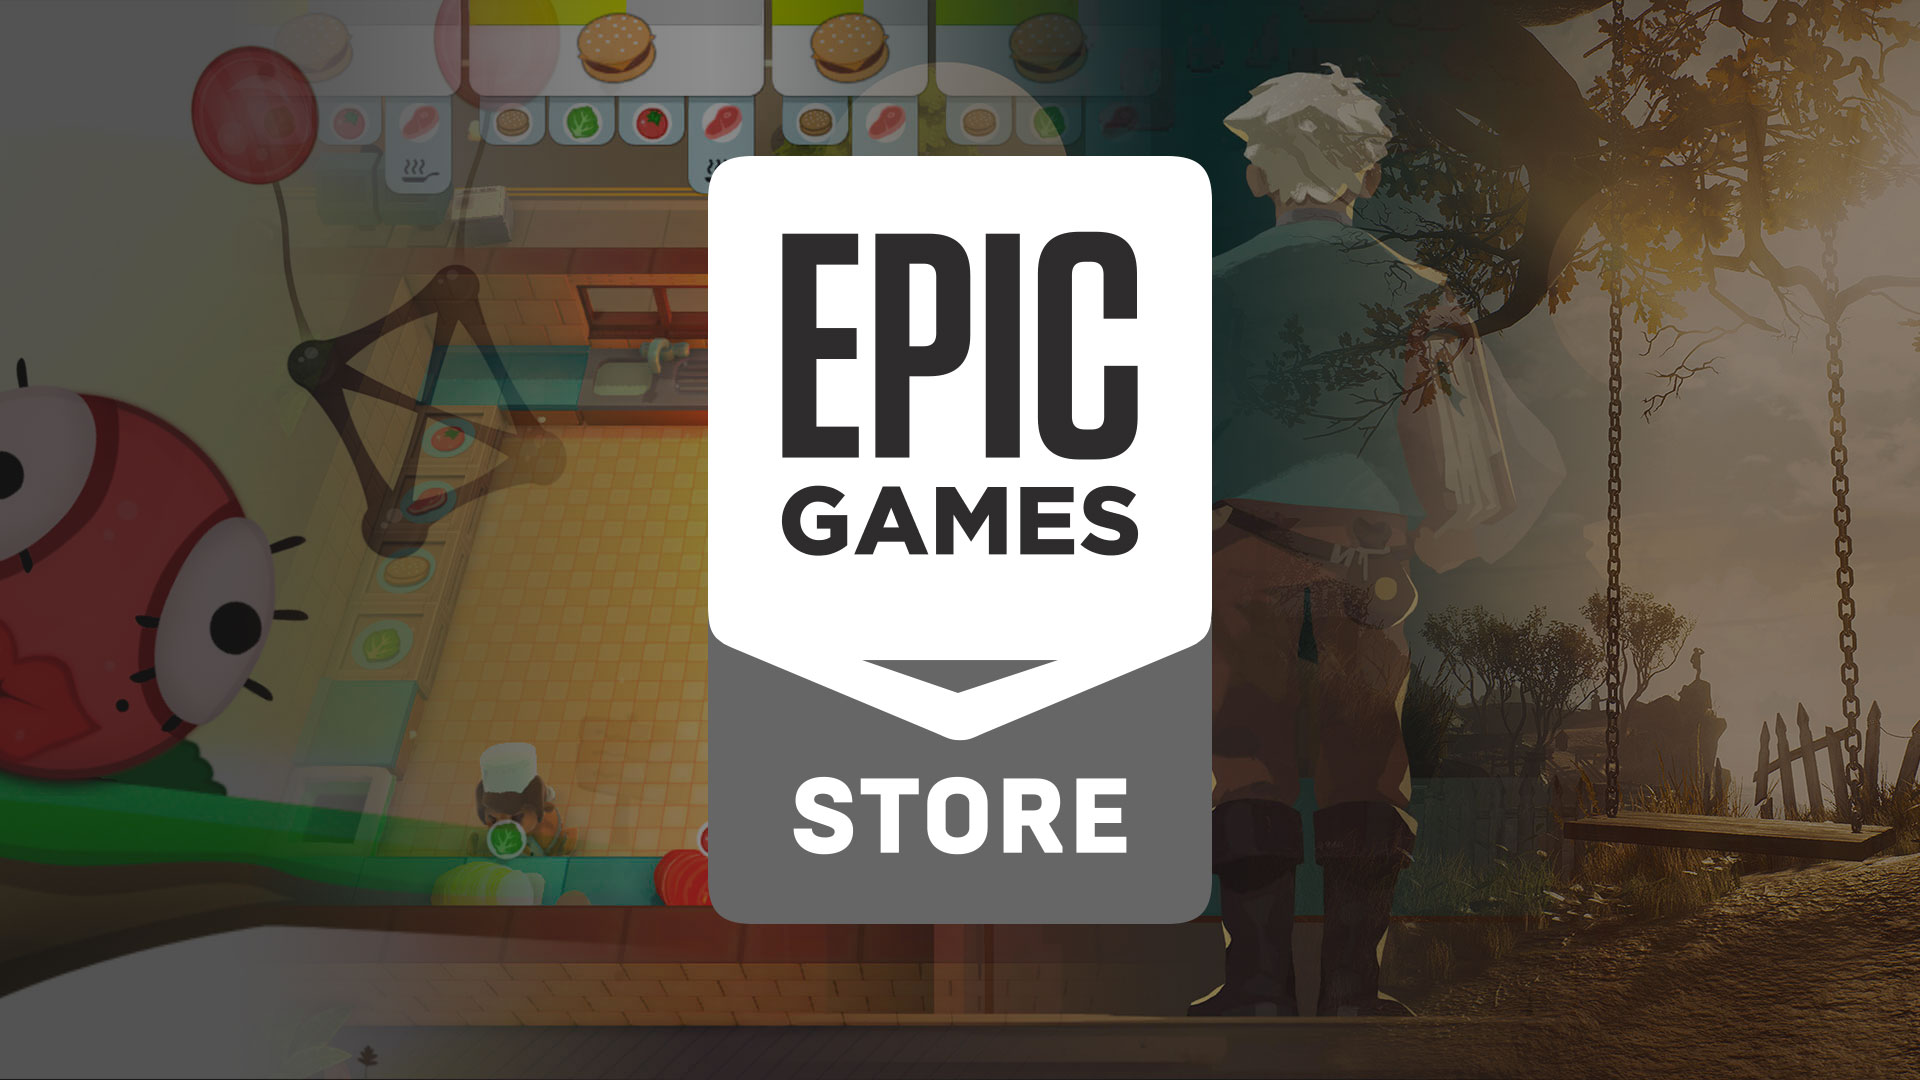 Core launches for free today exclusively on the Epic Games Store